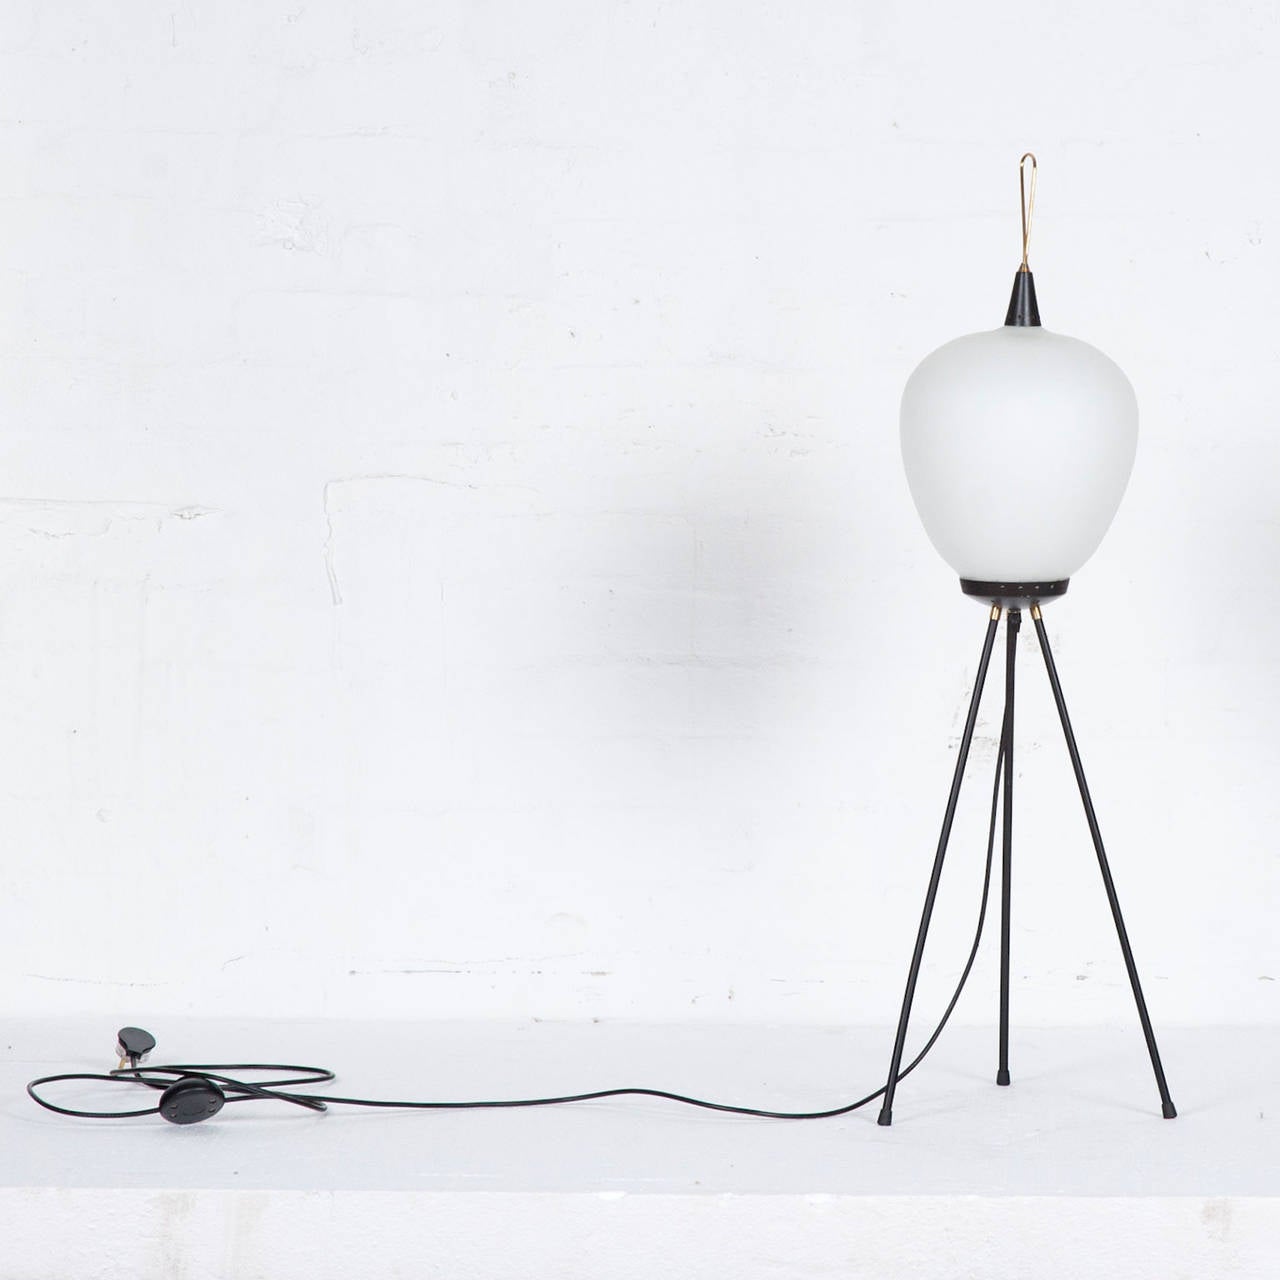 Mid-Century Italian glass lantern floor lamp sitting atop a slender tripod base. Very much in the style of Gio Ponti. This lovely lamp features black metal fittings and brass trims. Featuring a handy floor foot-switch, this lamp would be an